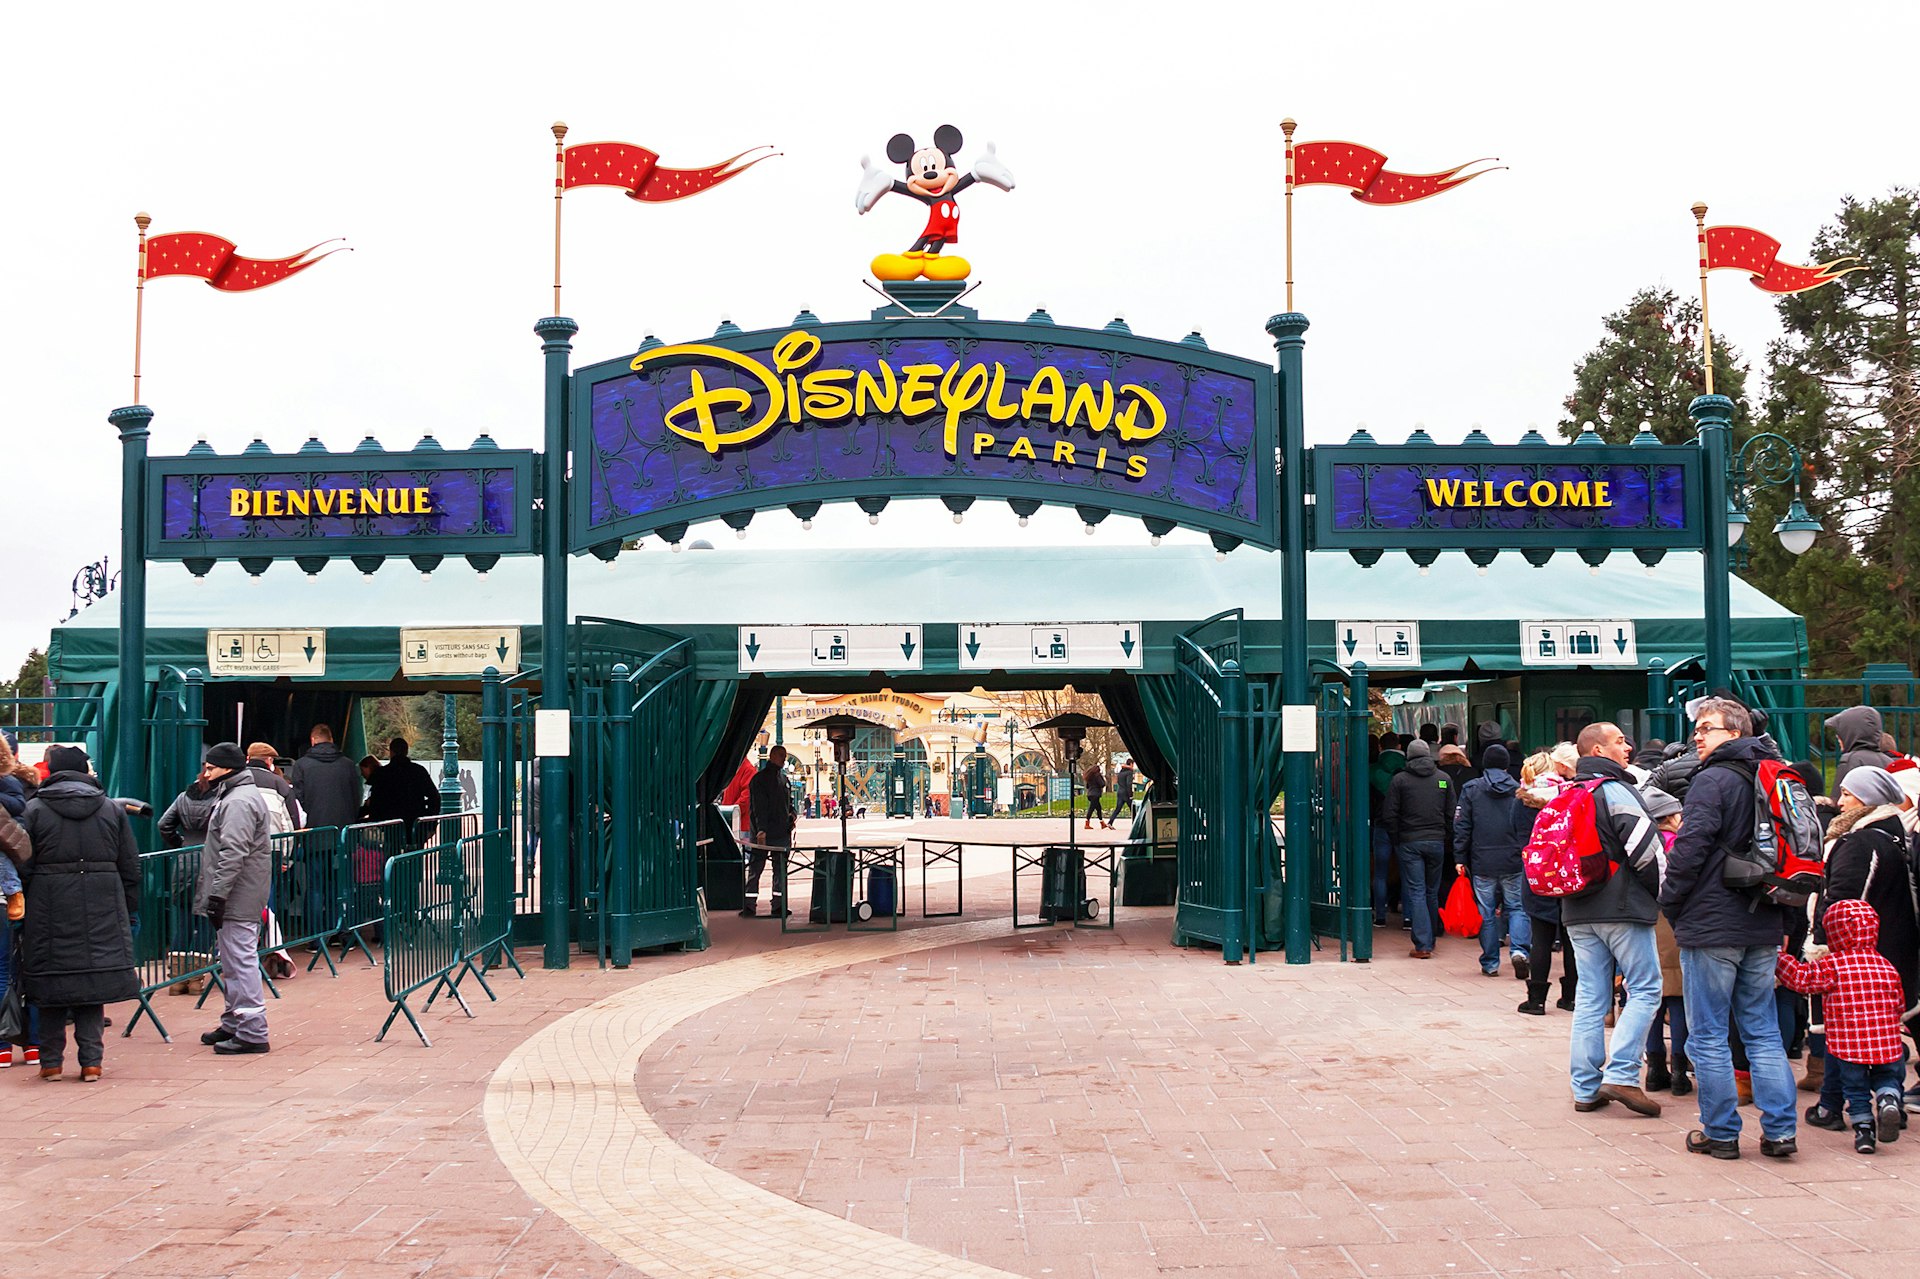 Main entrance (gate) to the Disneyland Paris. Disneyland is one of the most popular destinations in Paris